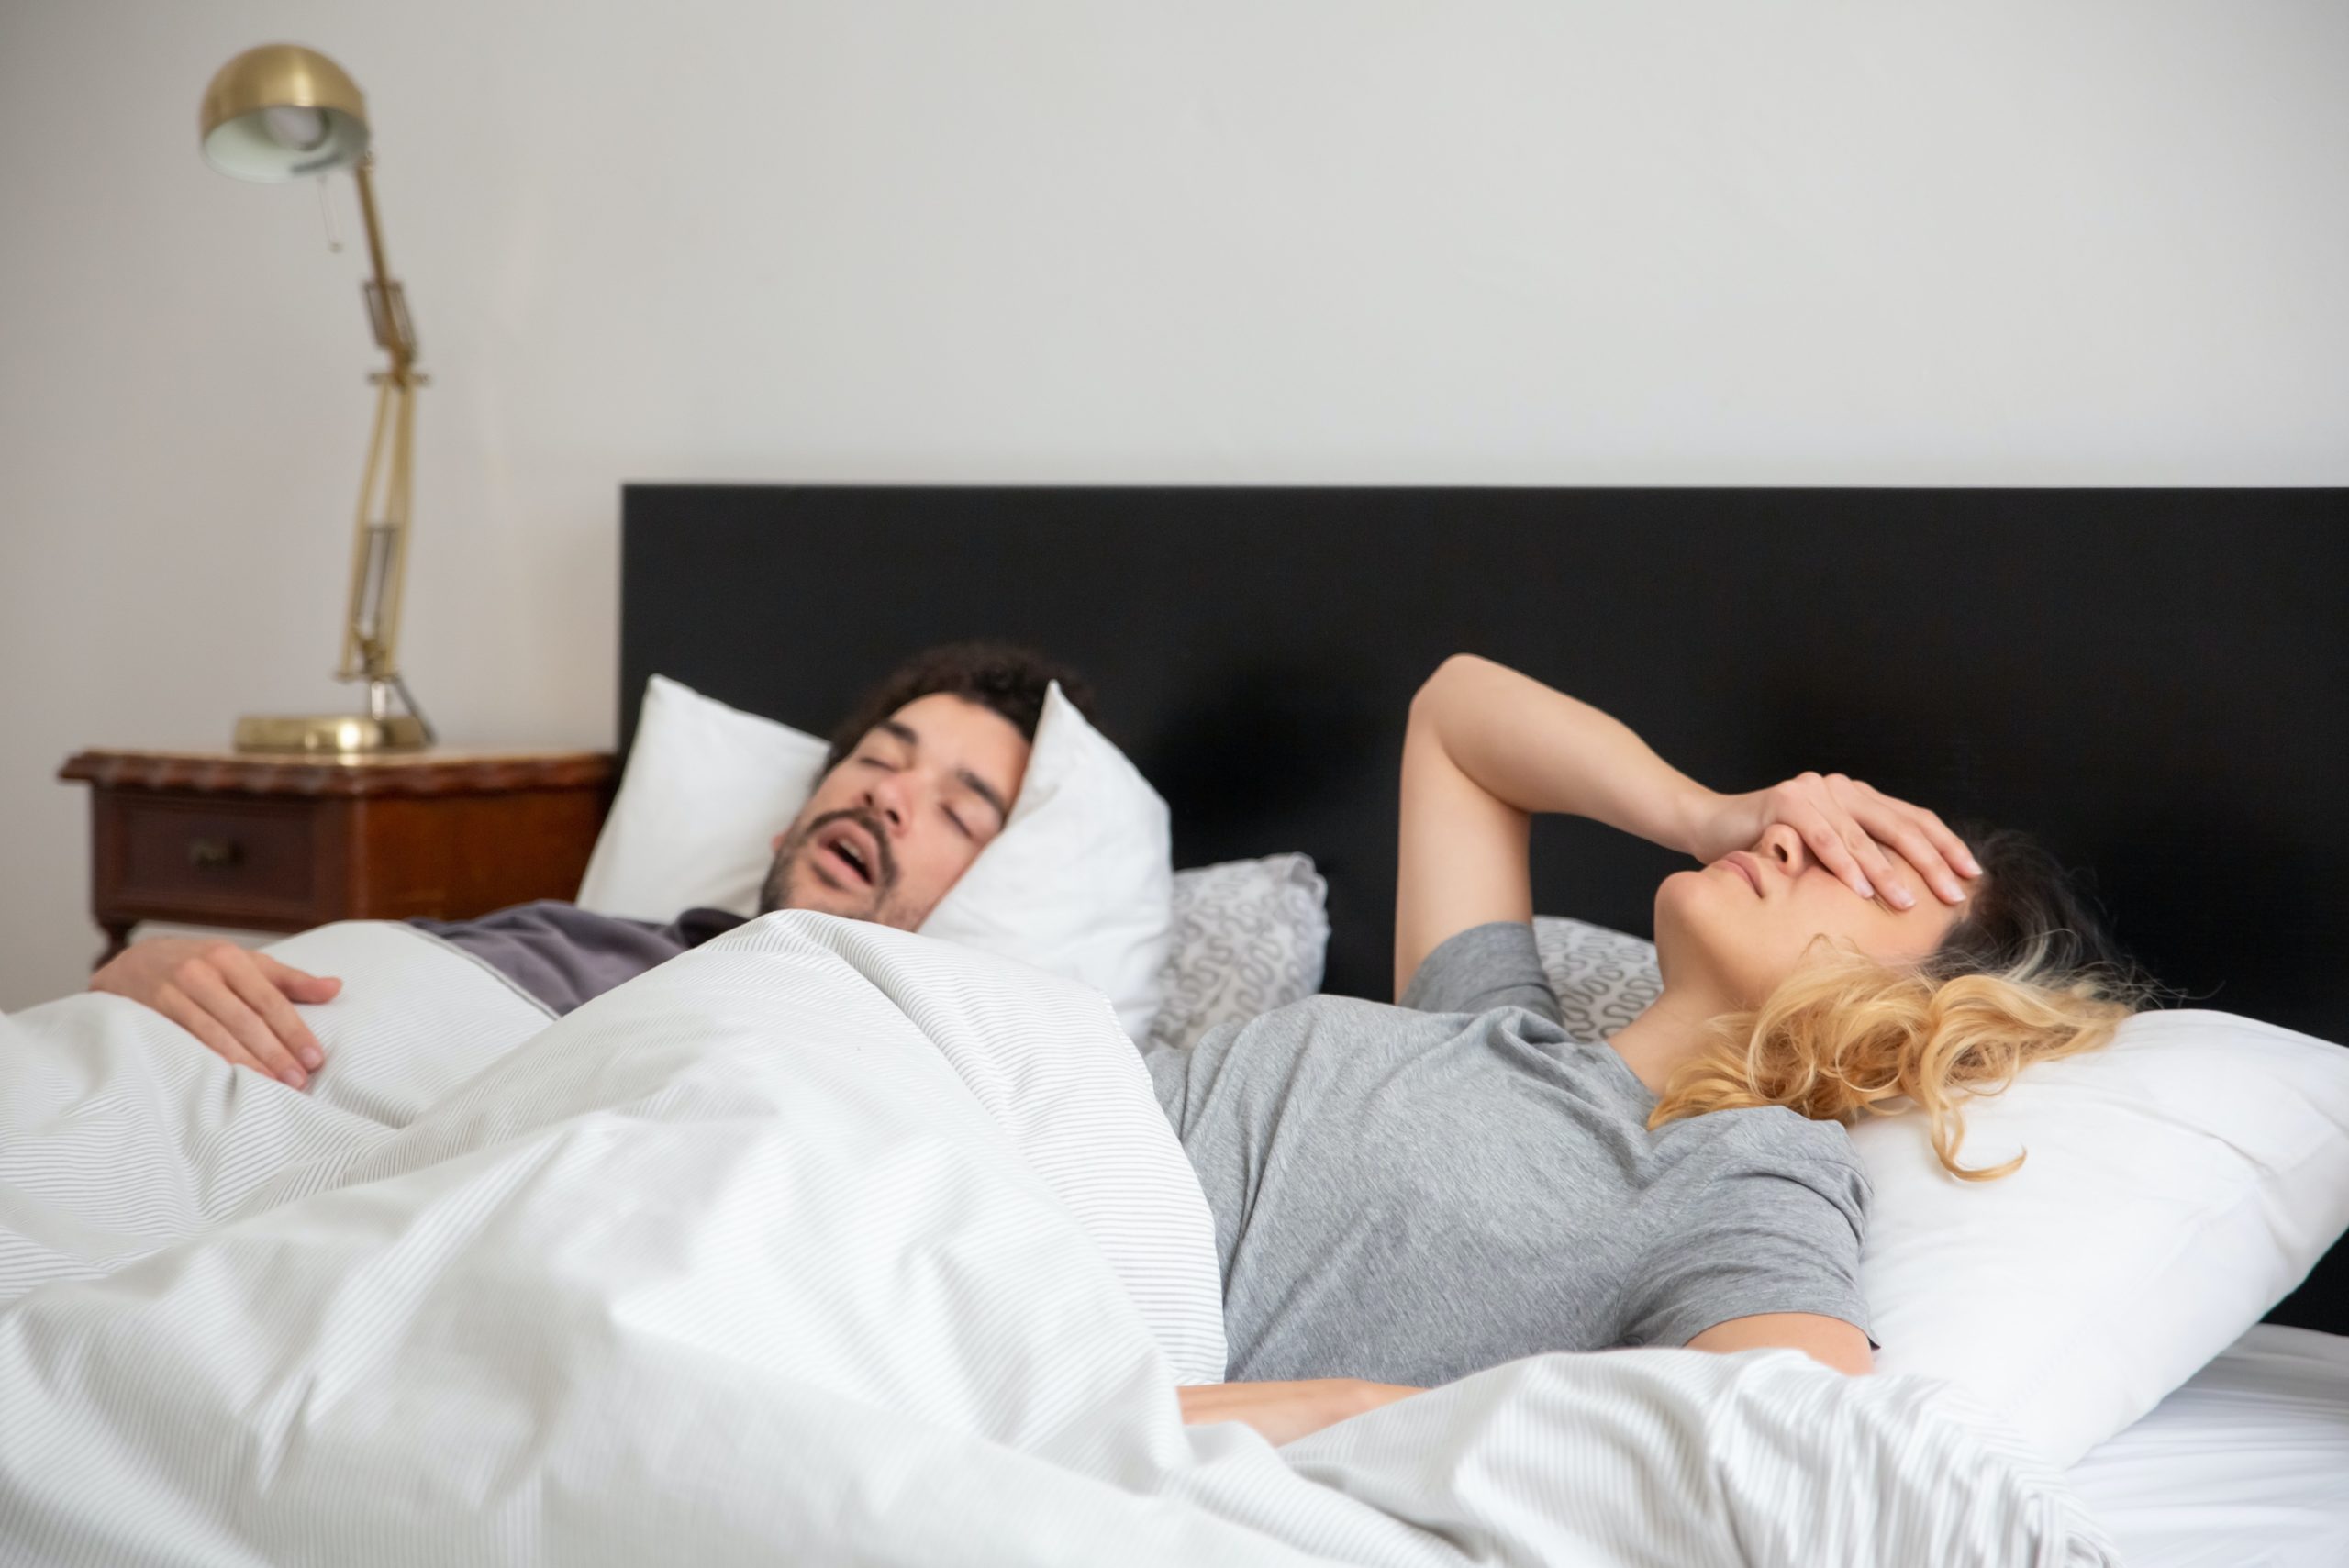 Understanding the Culprits: What Causes Snoring and How to Address Them